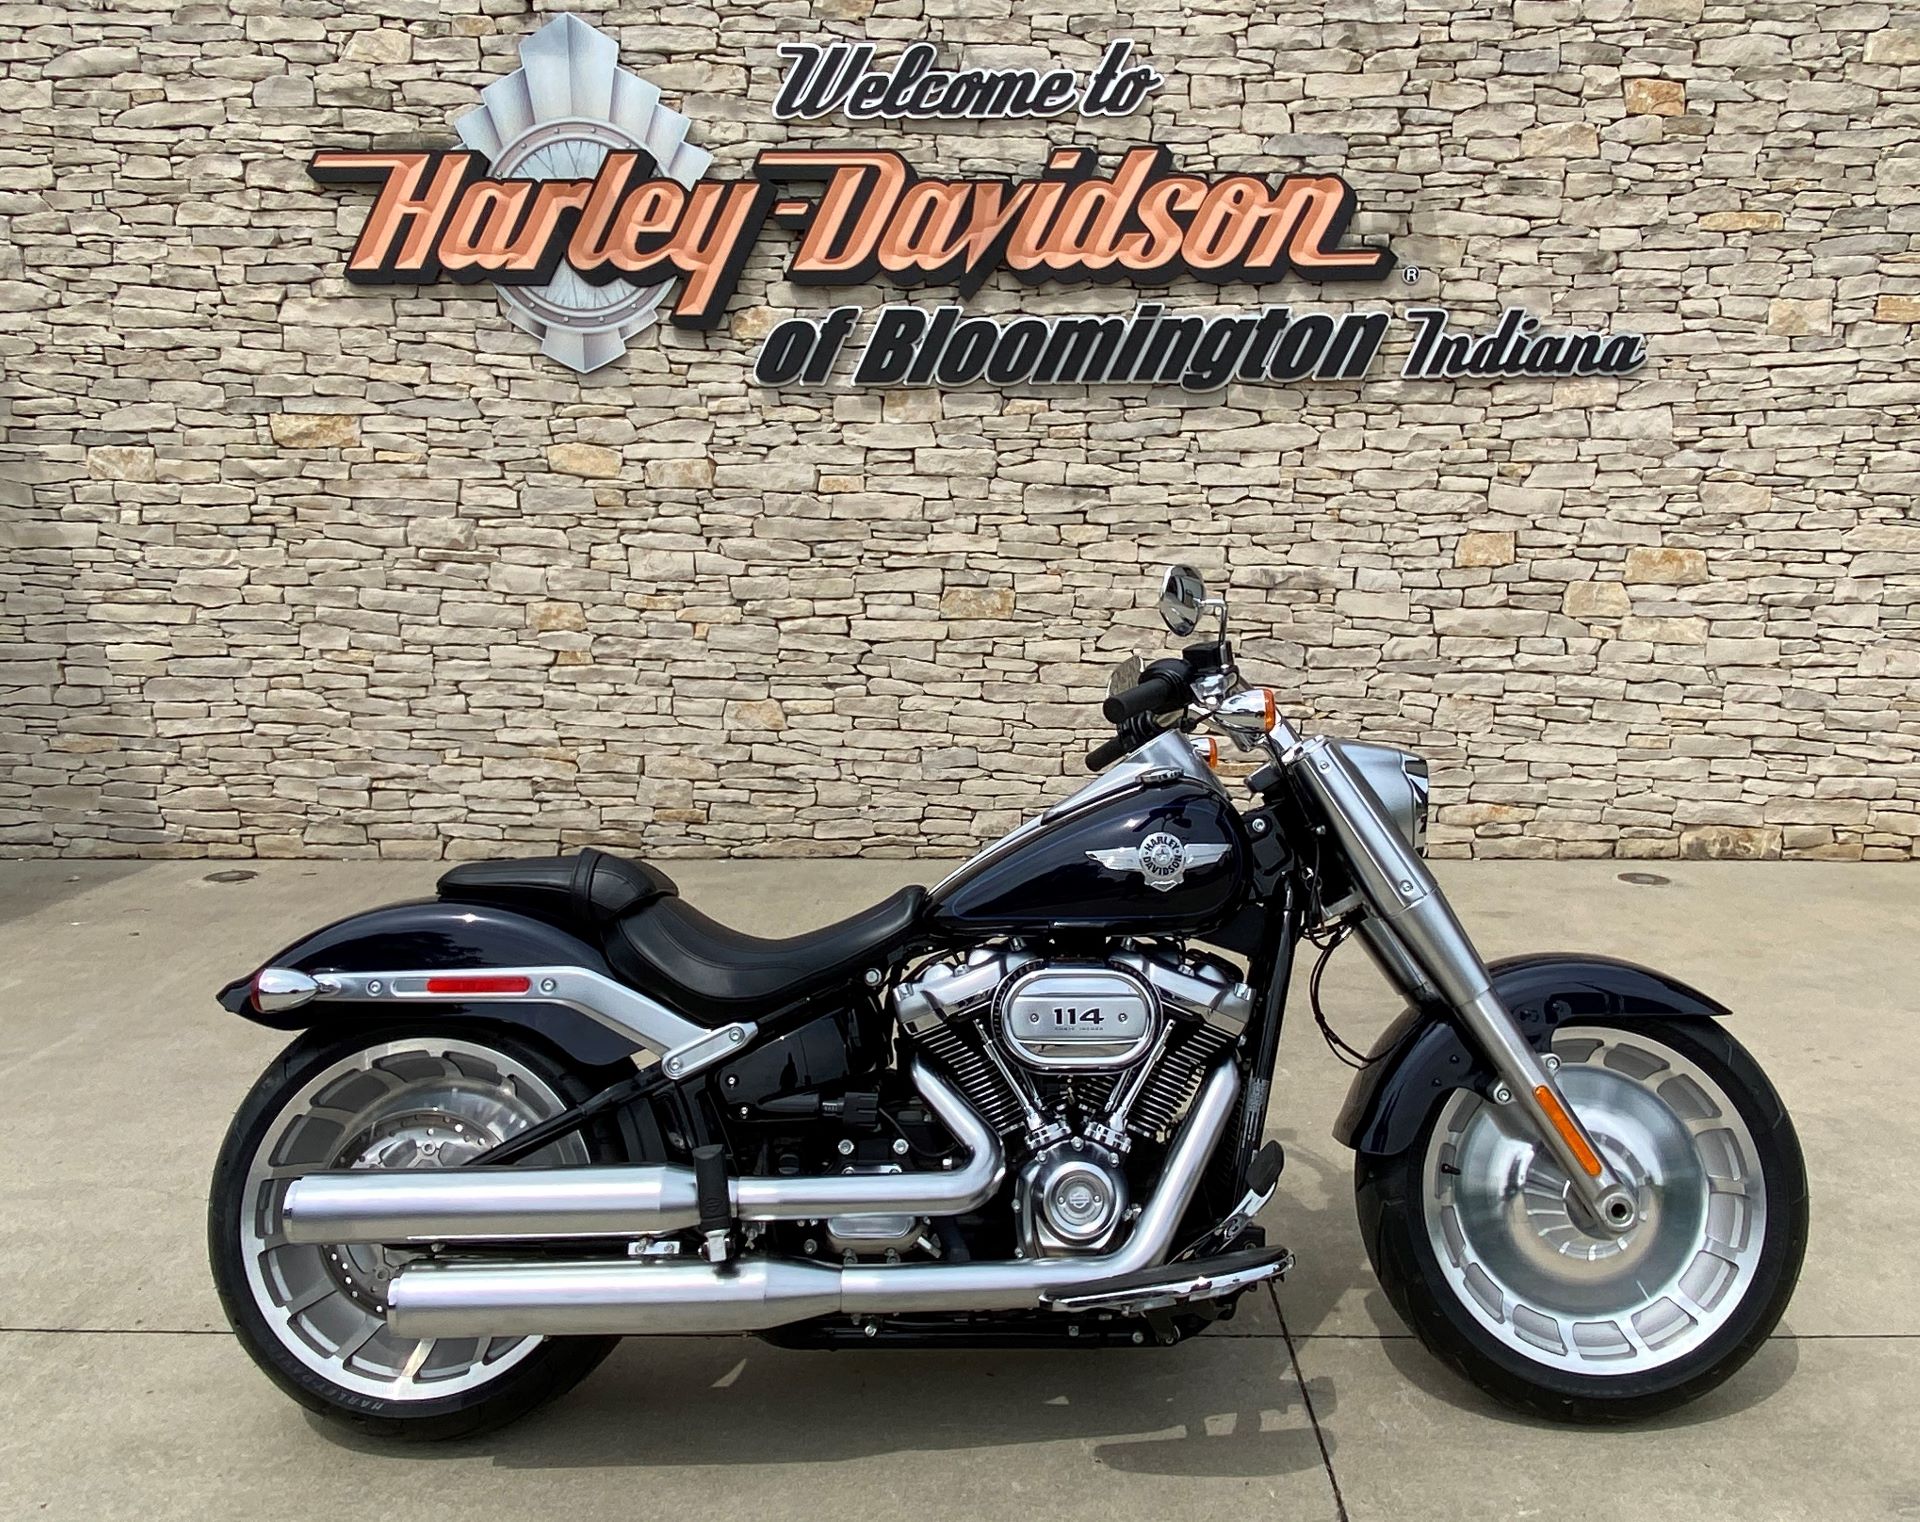 Used 2019 Harley Davidson Fat Boy 114 Motorcycles In Lafayette In 064161 Midnight Blue